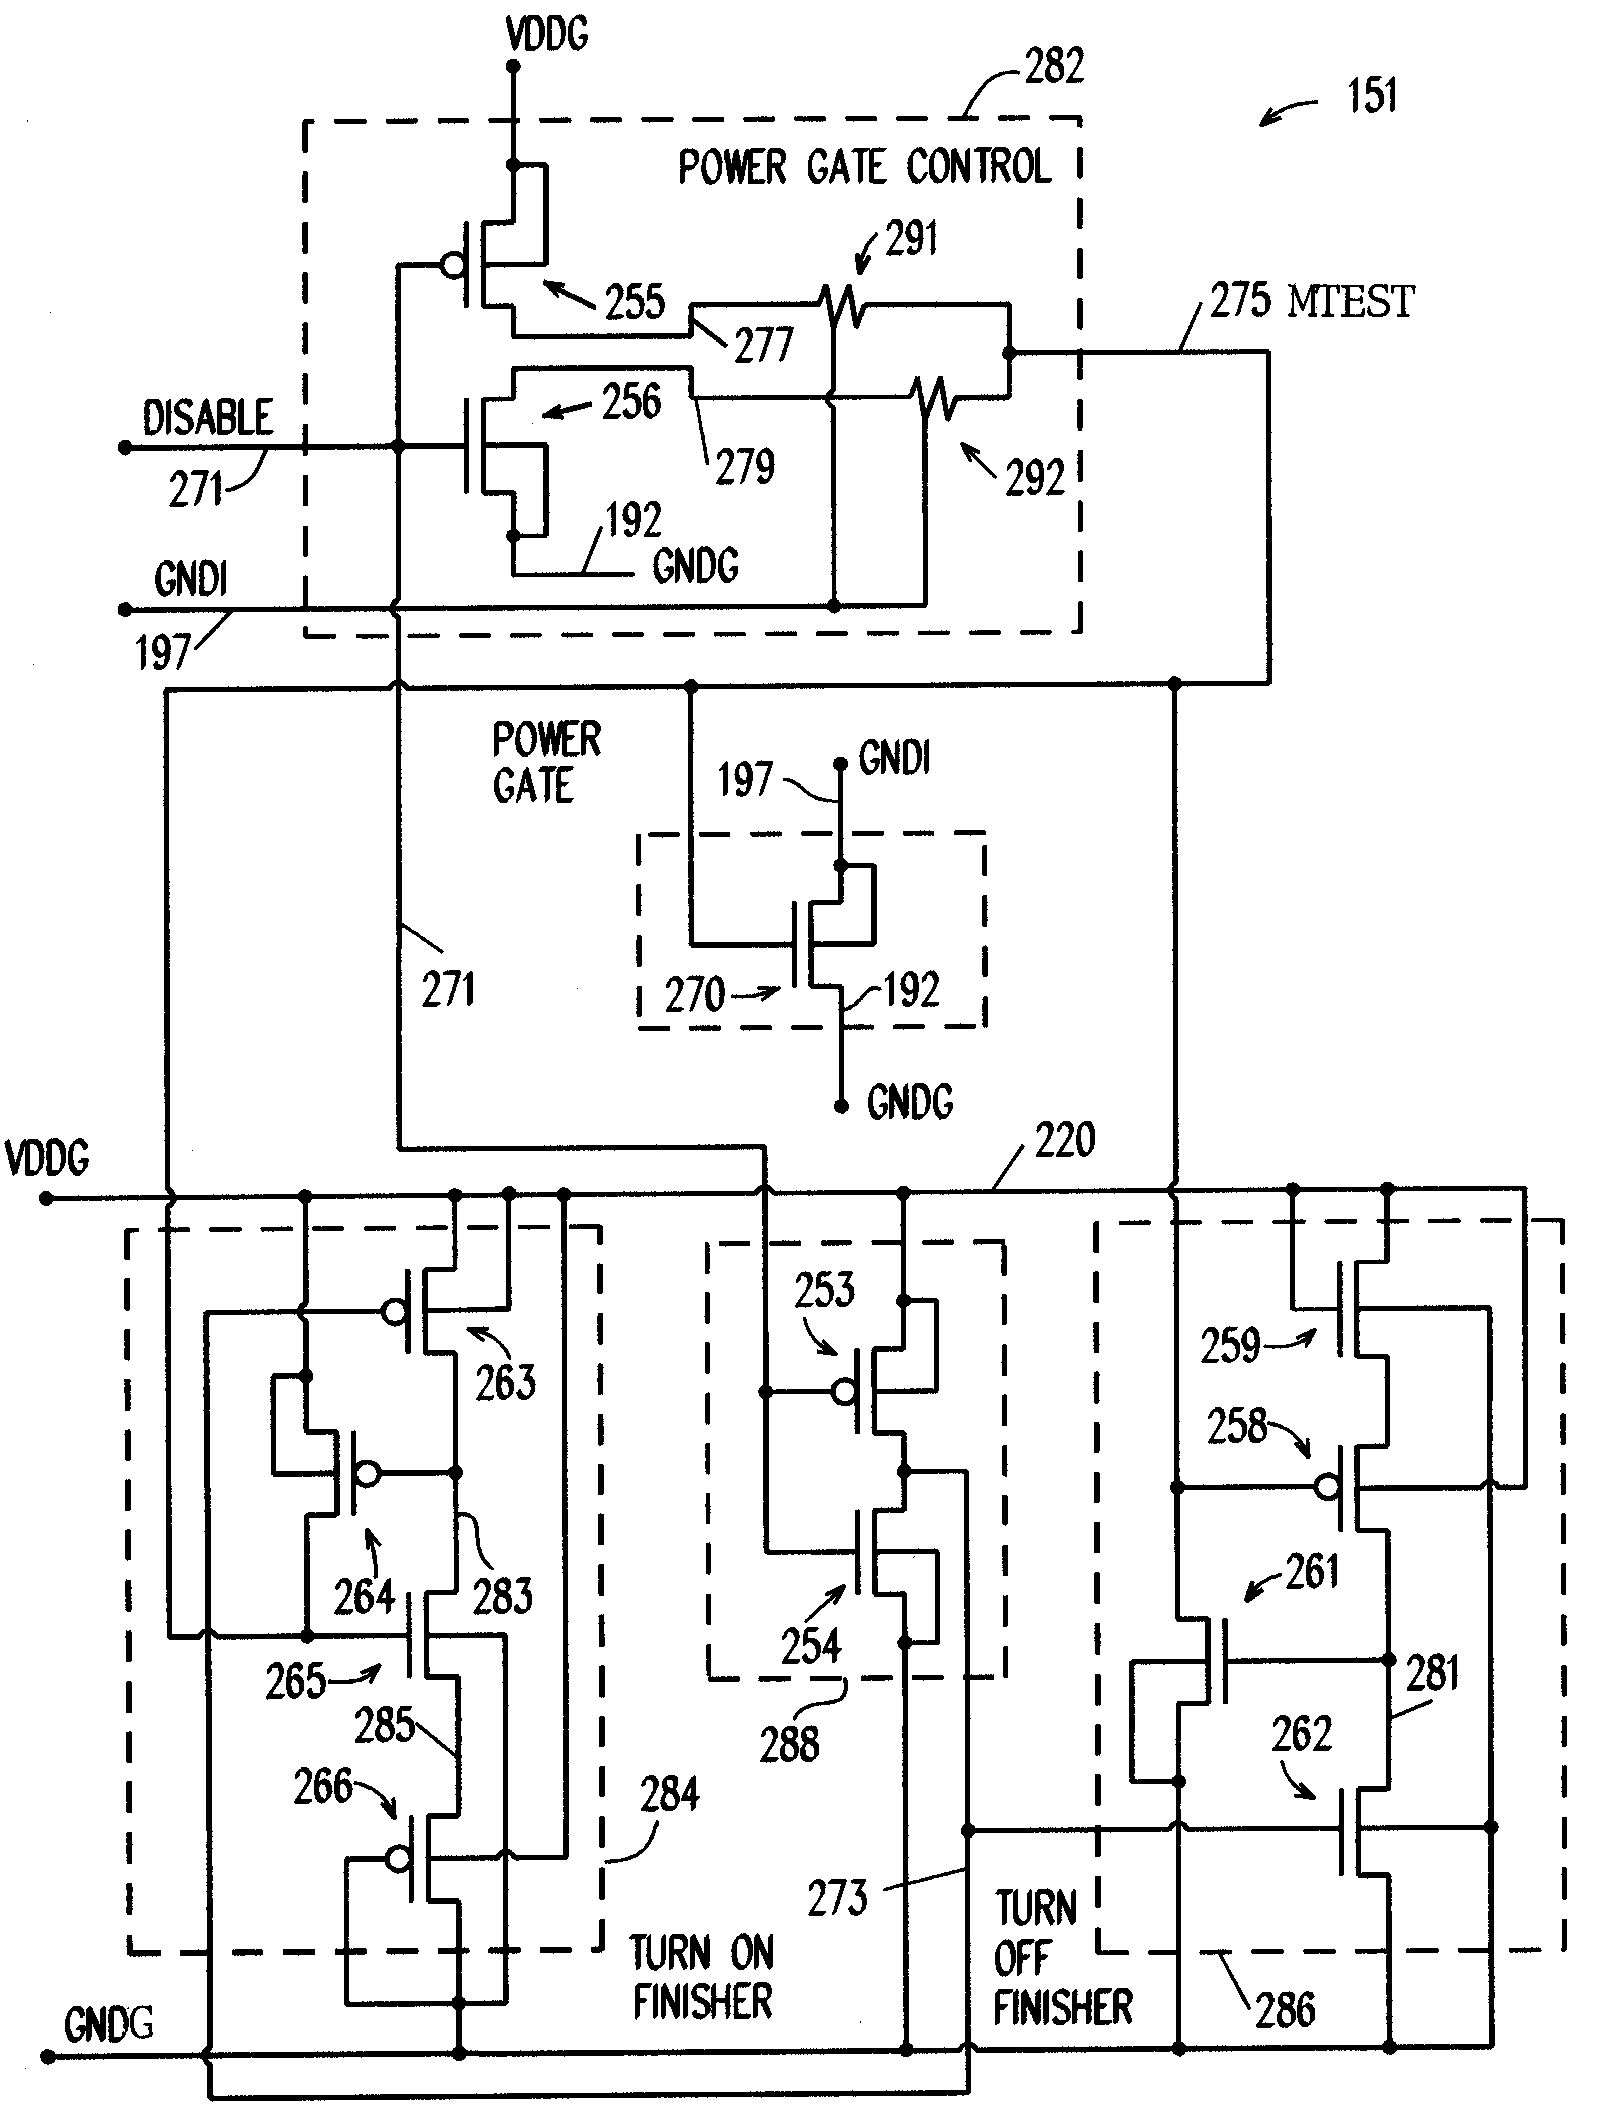 System and method for power gating